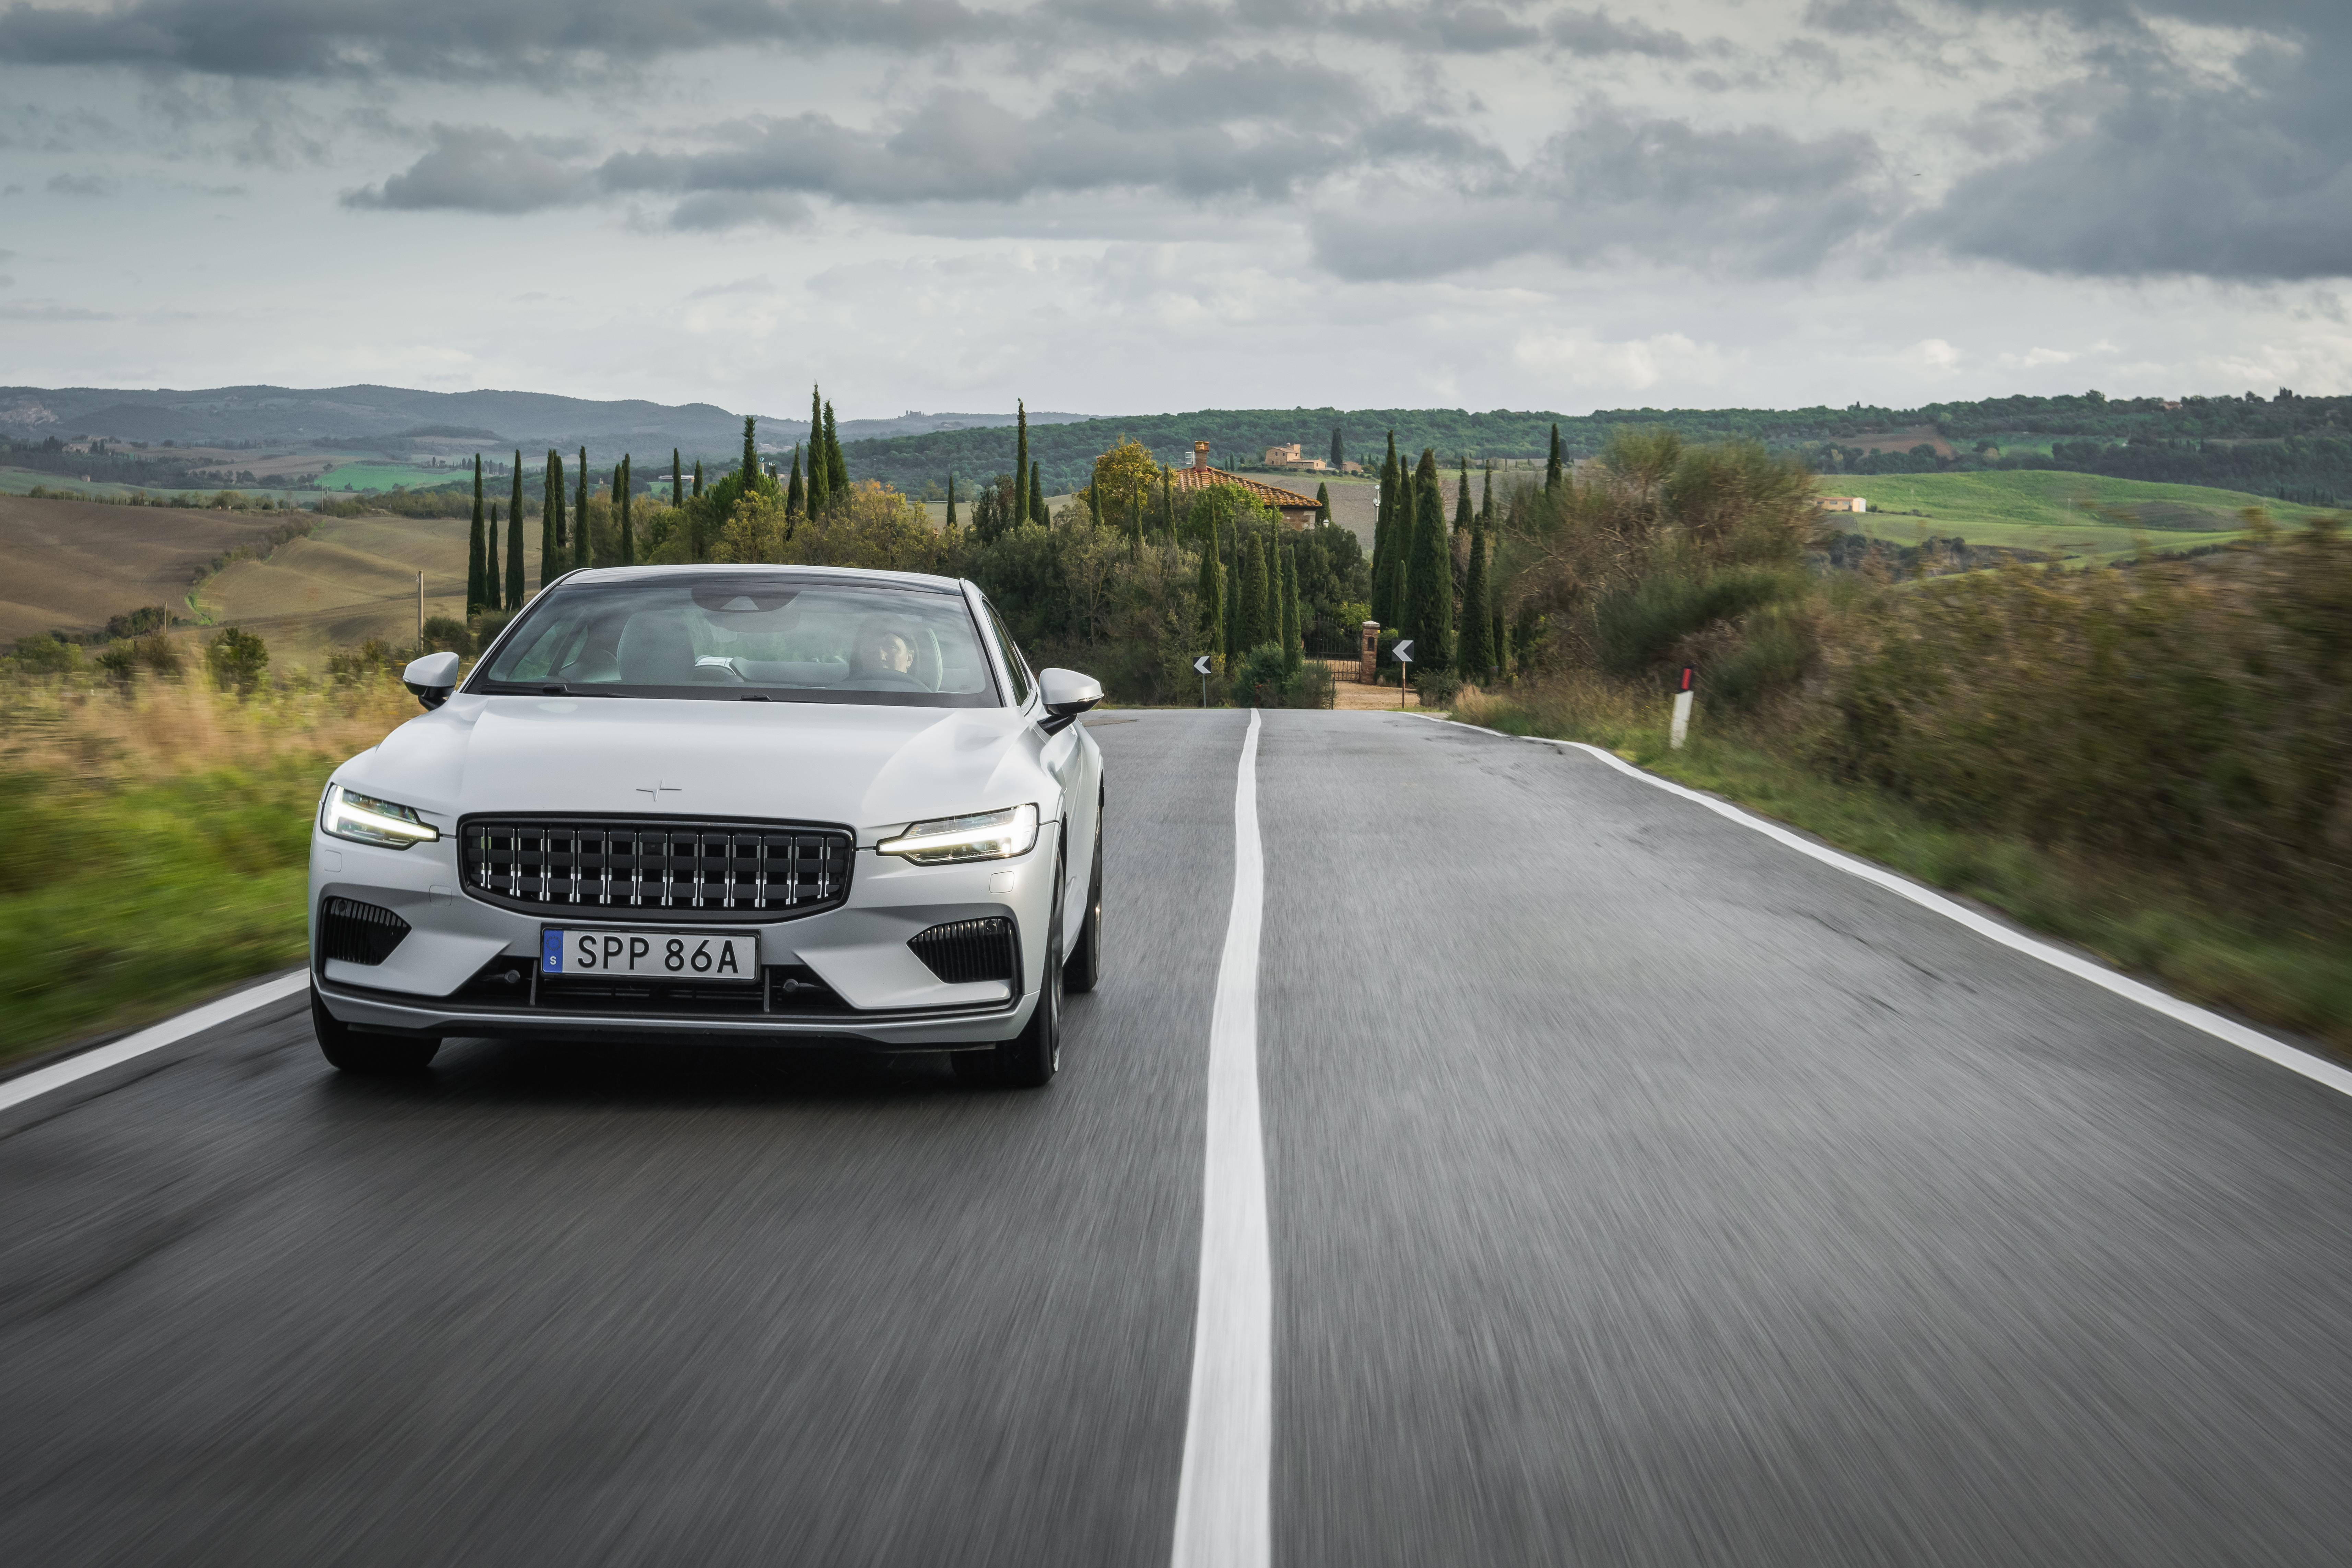 The Polestar 1 is packed with tech